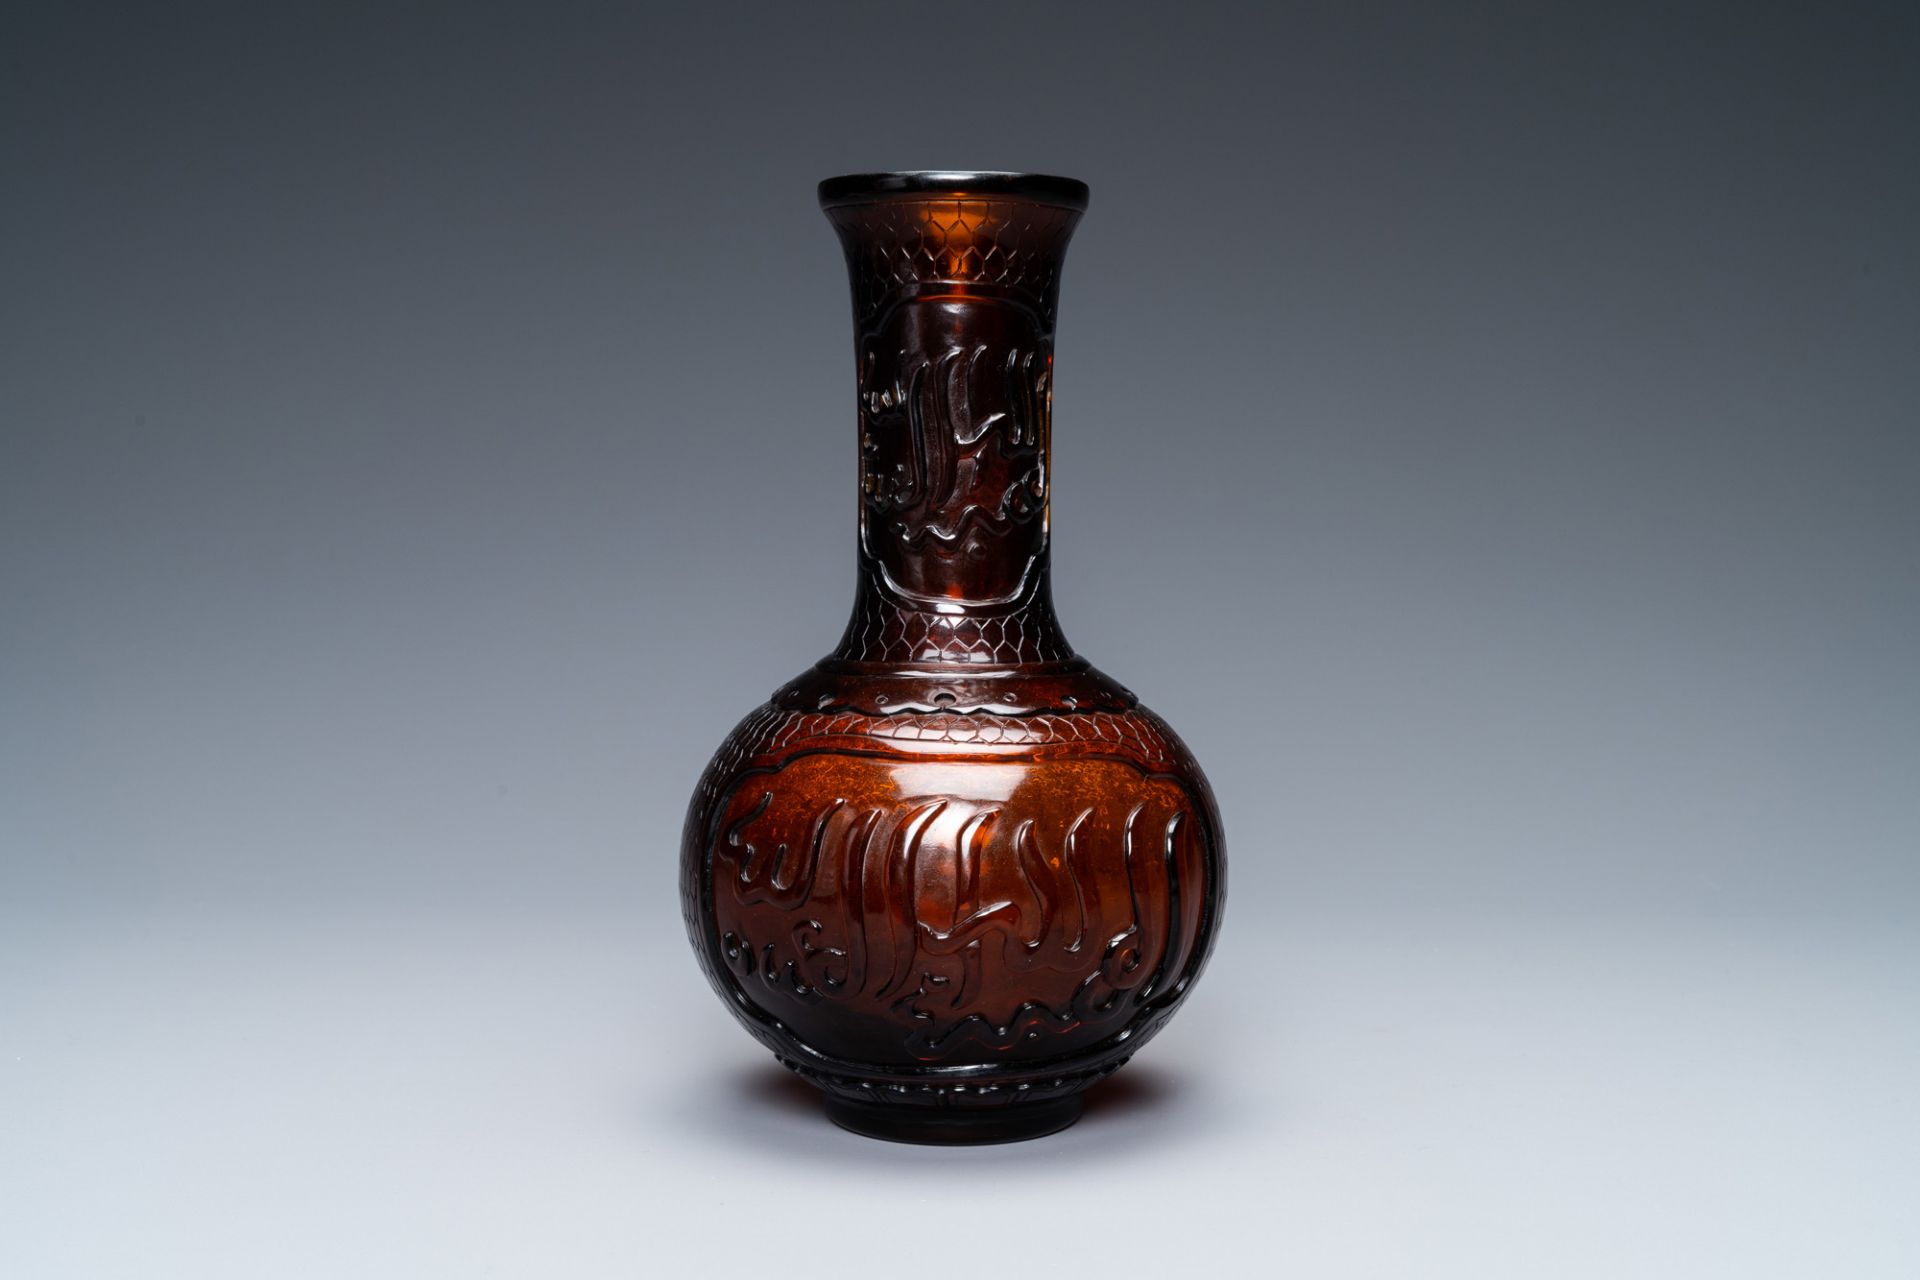 A Chinese Islamic market Beijing glass vase inscribed 'Allah' and 'Muhammad the Prophet', 18/19th C. - Image 7 of 10